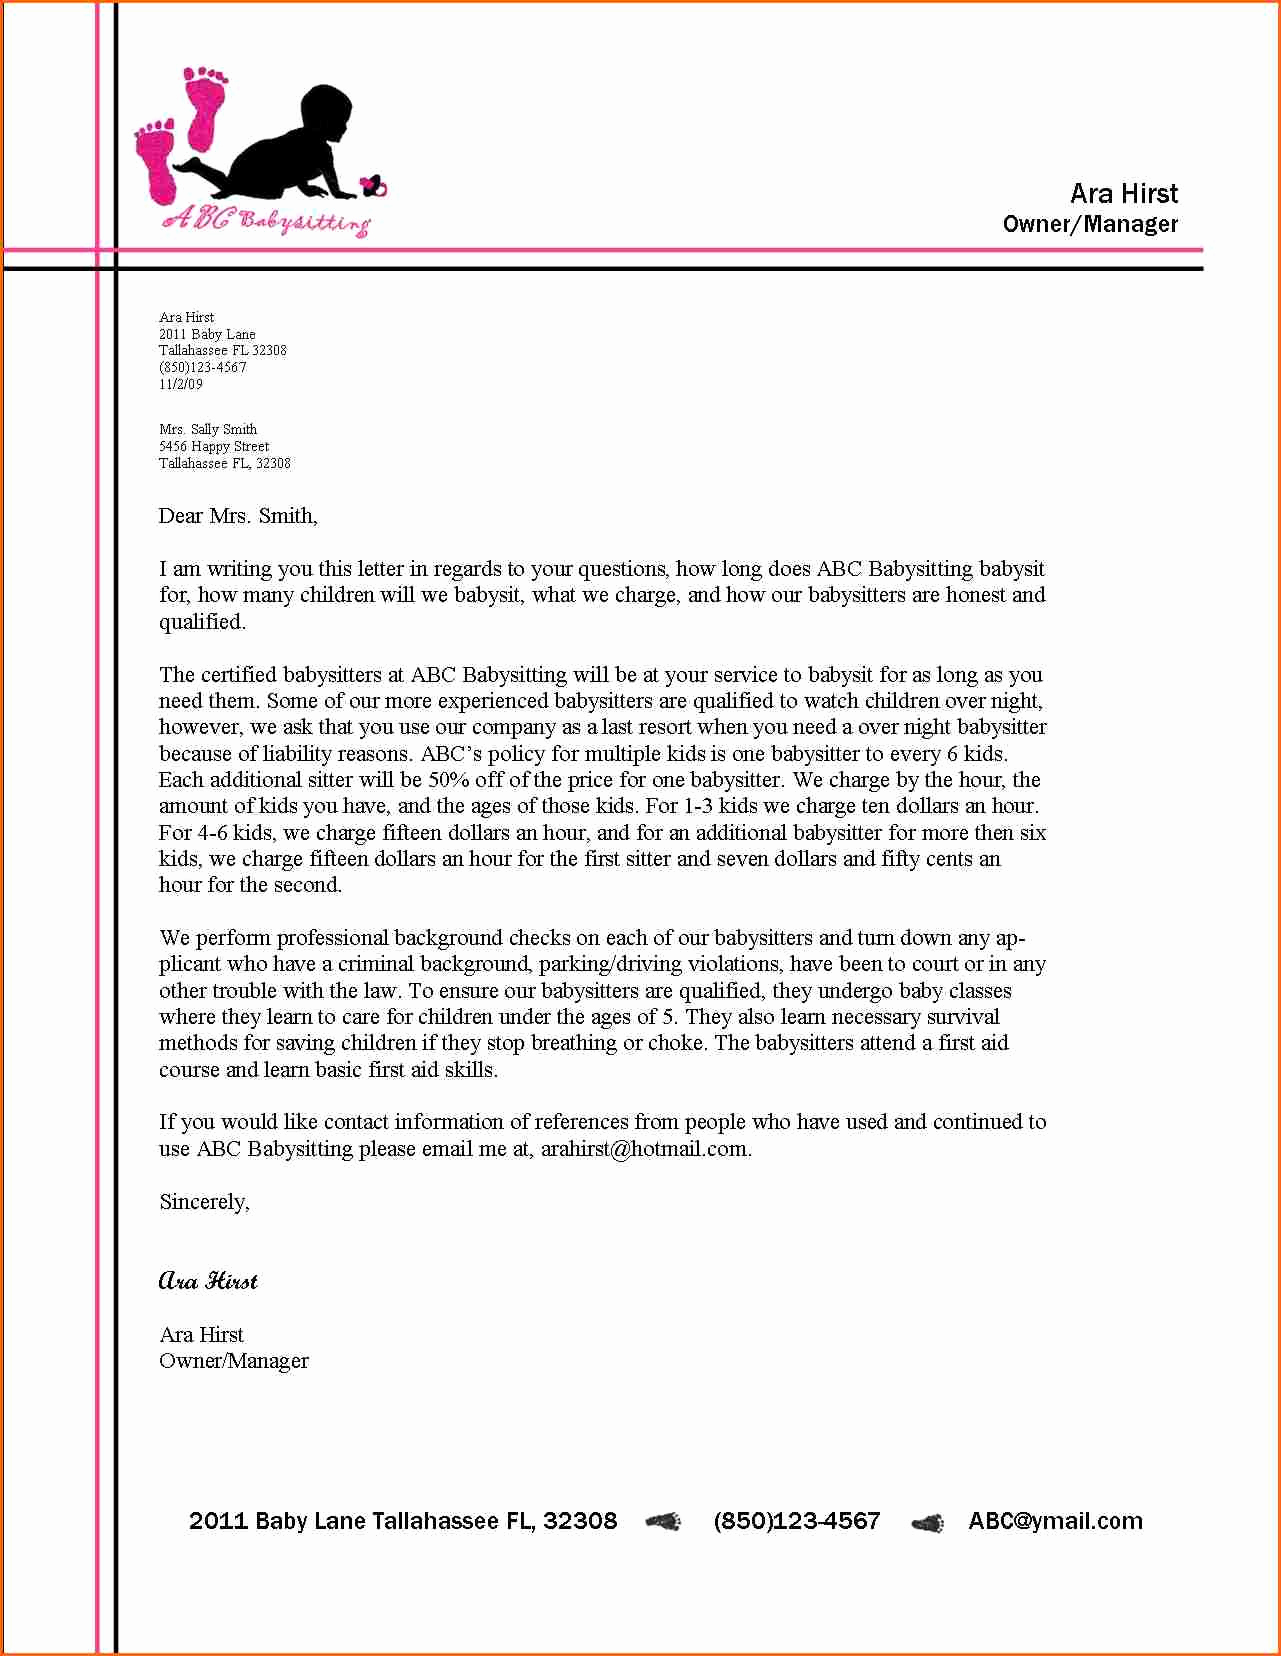 Business Letter format Example Awesome Business Letter Heading format Examples Letterheads for